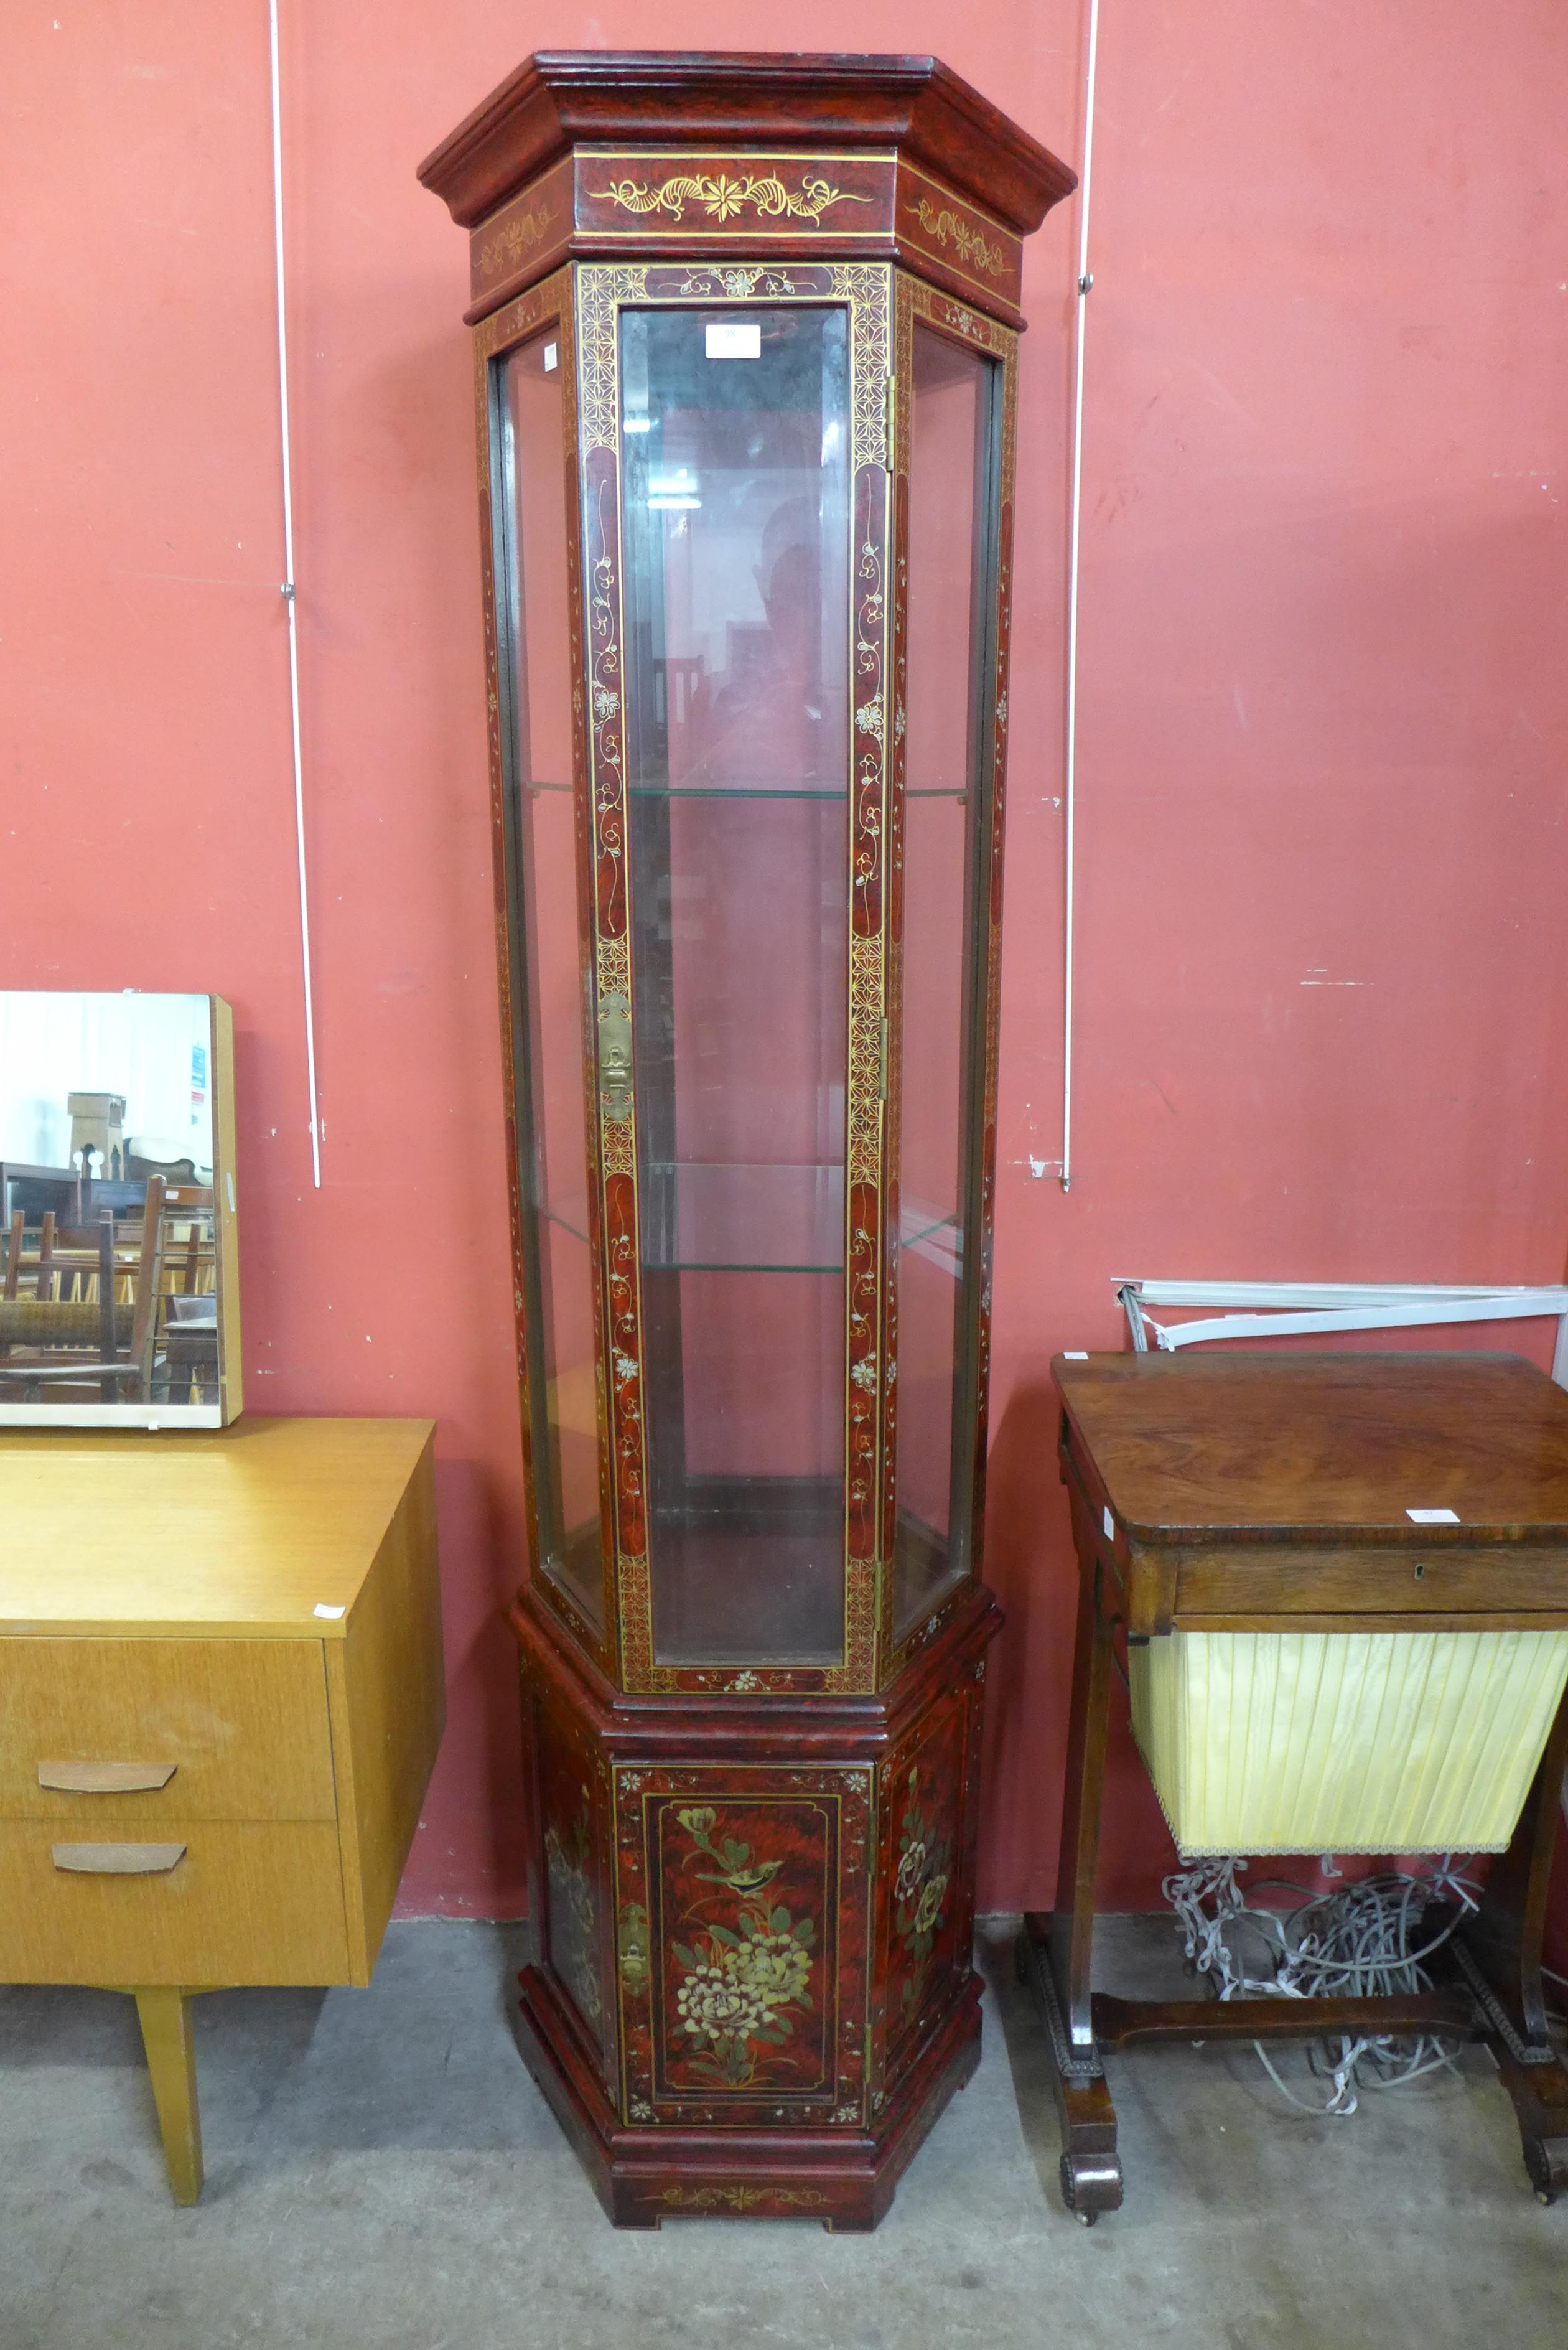 A Japanned hexagonal display cabinet